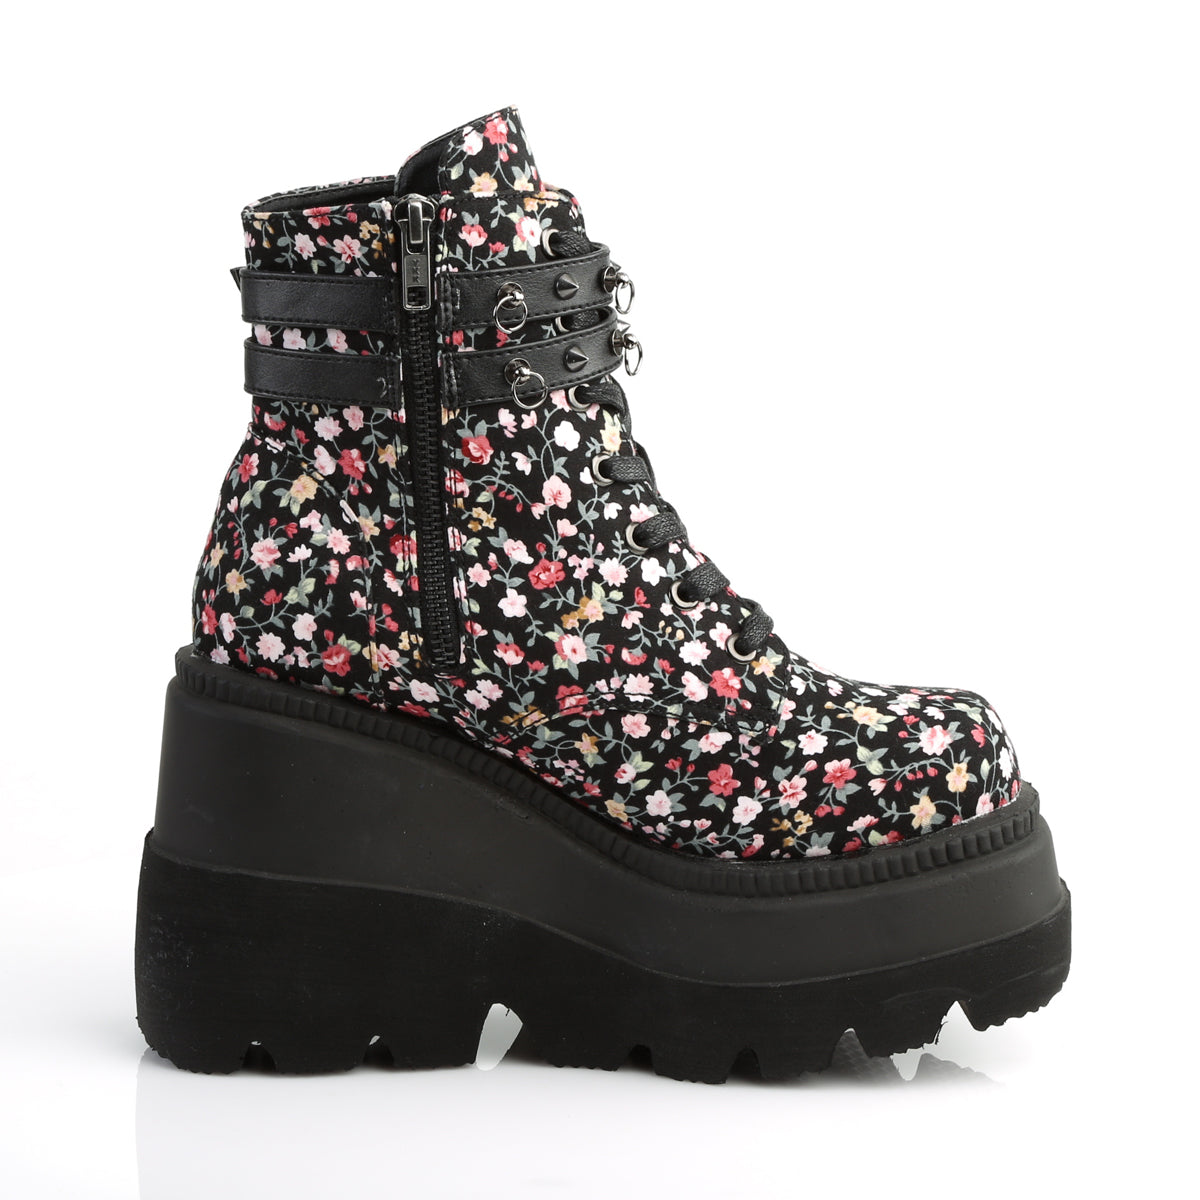 SHAKER-52ST Floral Fabric Ankle Boot Demonia